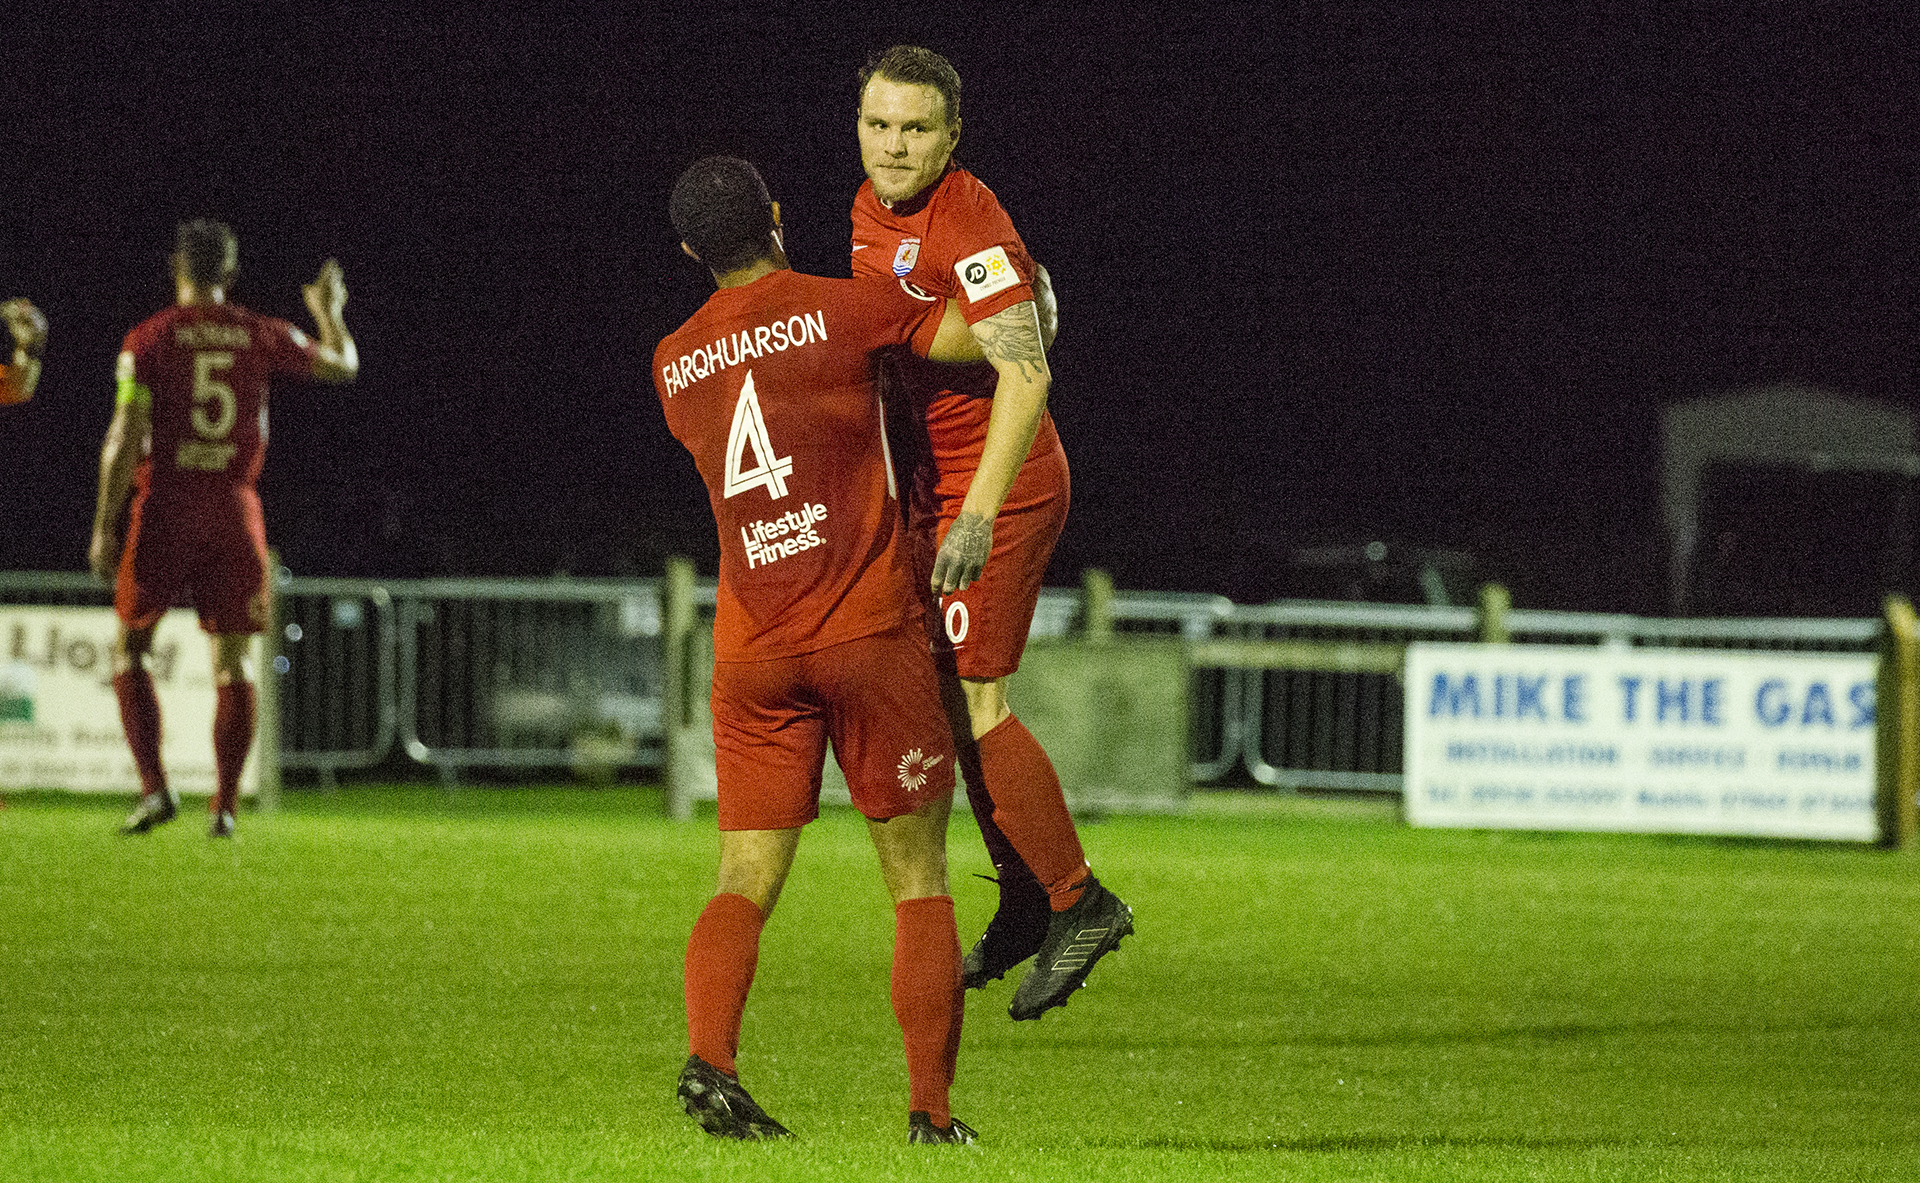 Priestley Farquharson hoists Jamie Insall up to celebrate his opening goal | © NCM Media